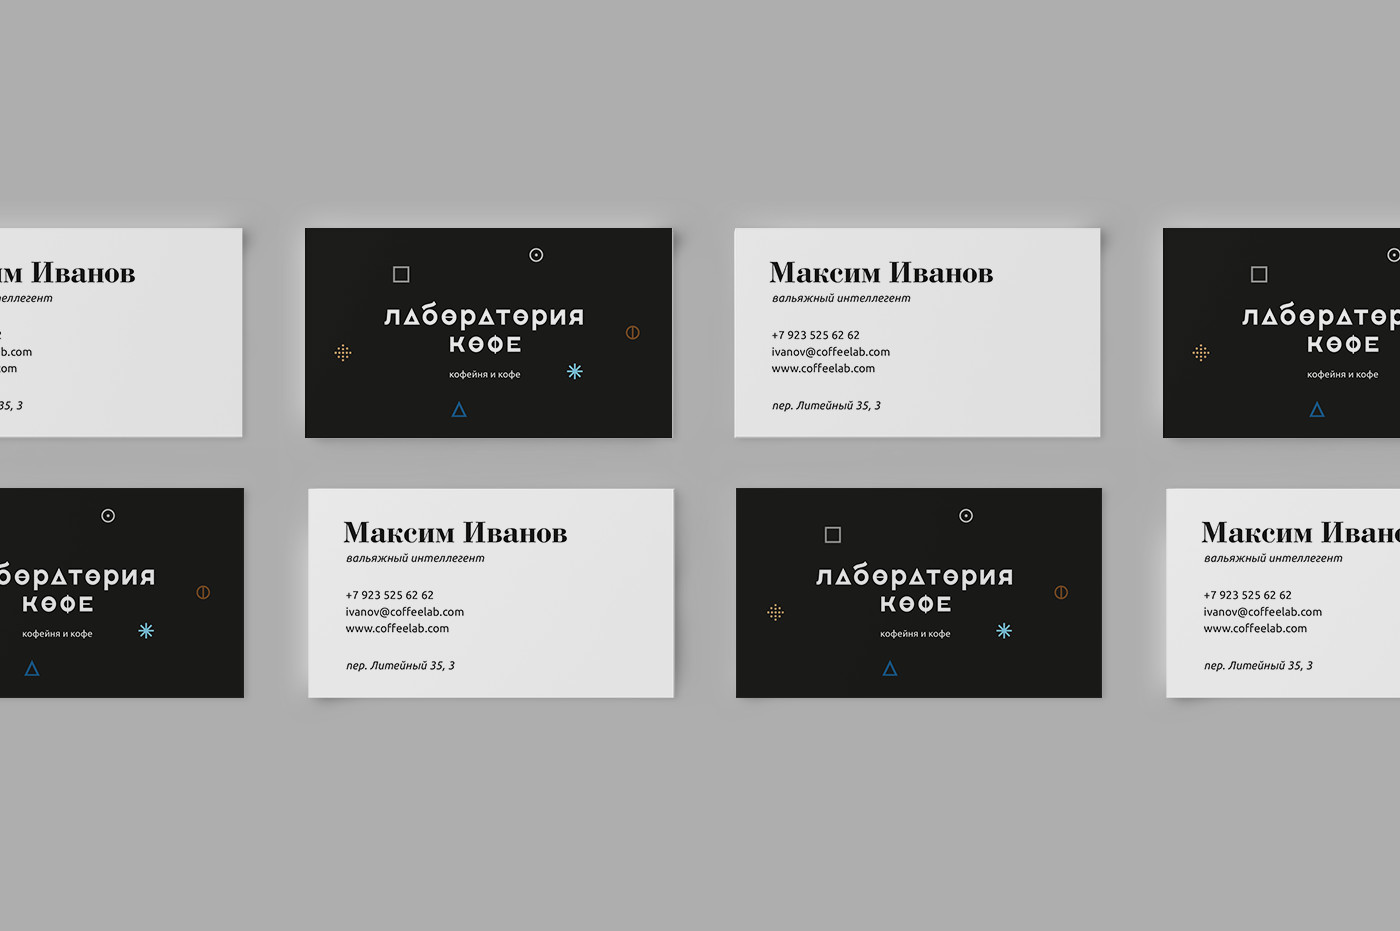 Coffee lab laboratory ryadovoy alchemy Food  cafe restaurant icons Picto gold symbol Russia science black